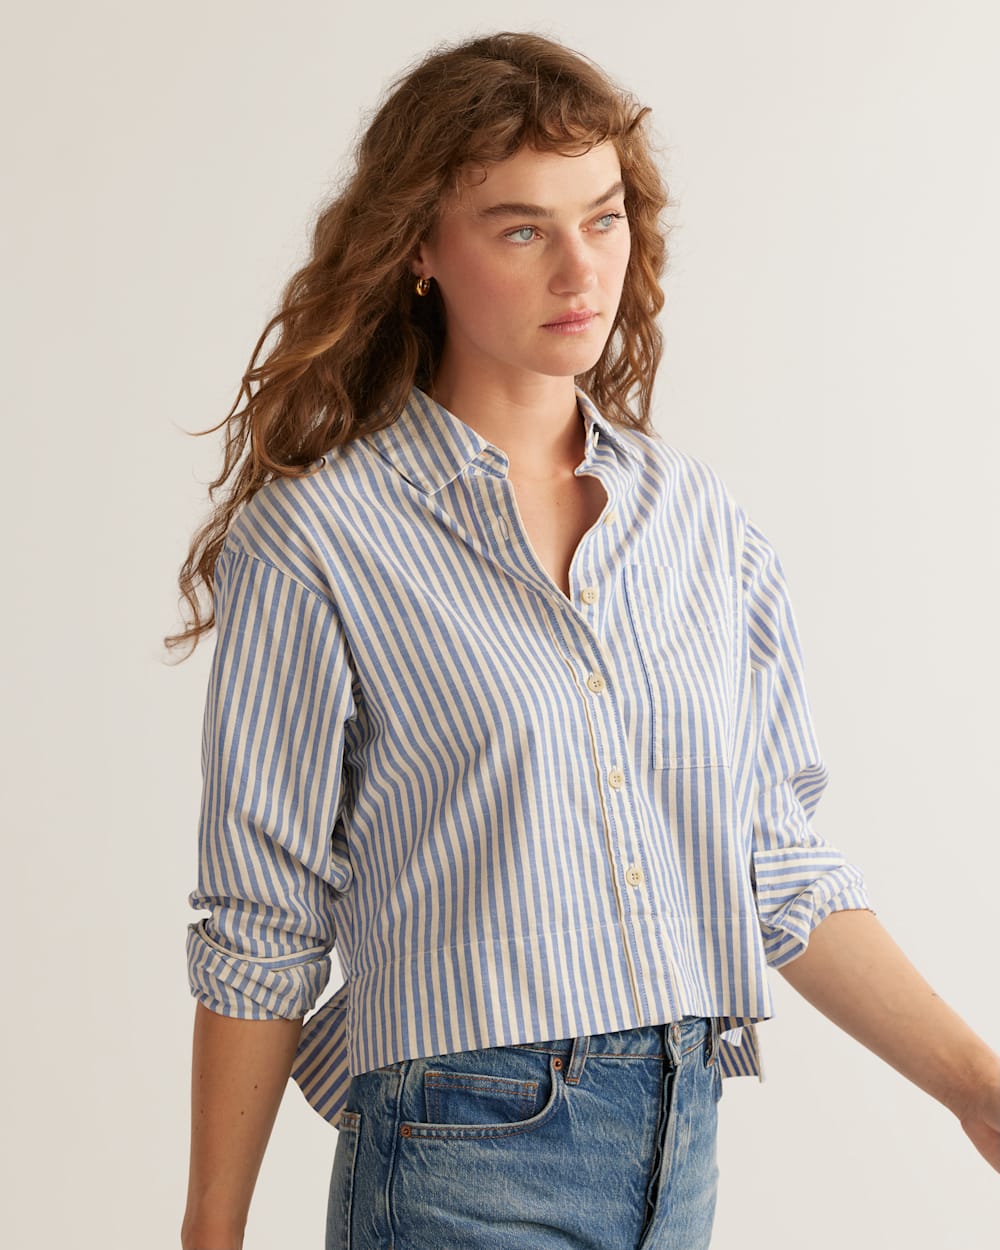 ALTERNATE VIEW OF WOMEN'S BRENTWOOD OVERSIZED SHIRT IN BLUE/IVORY STRIPE image number 4